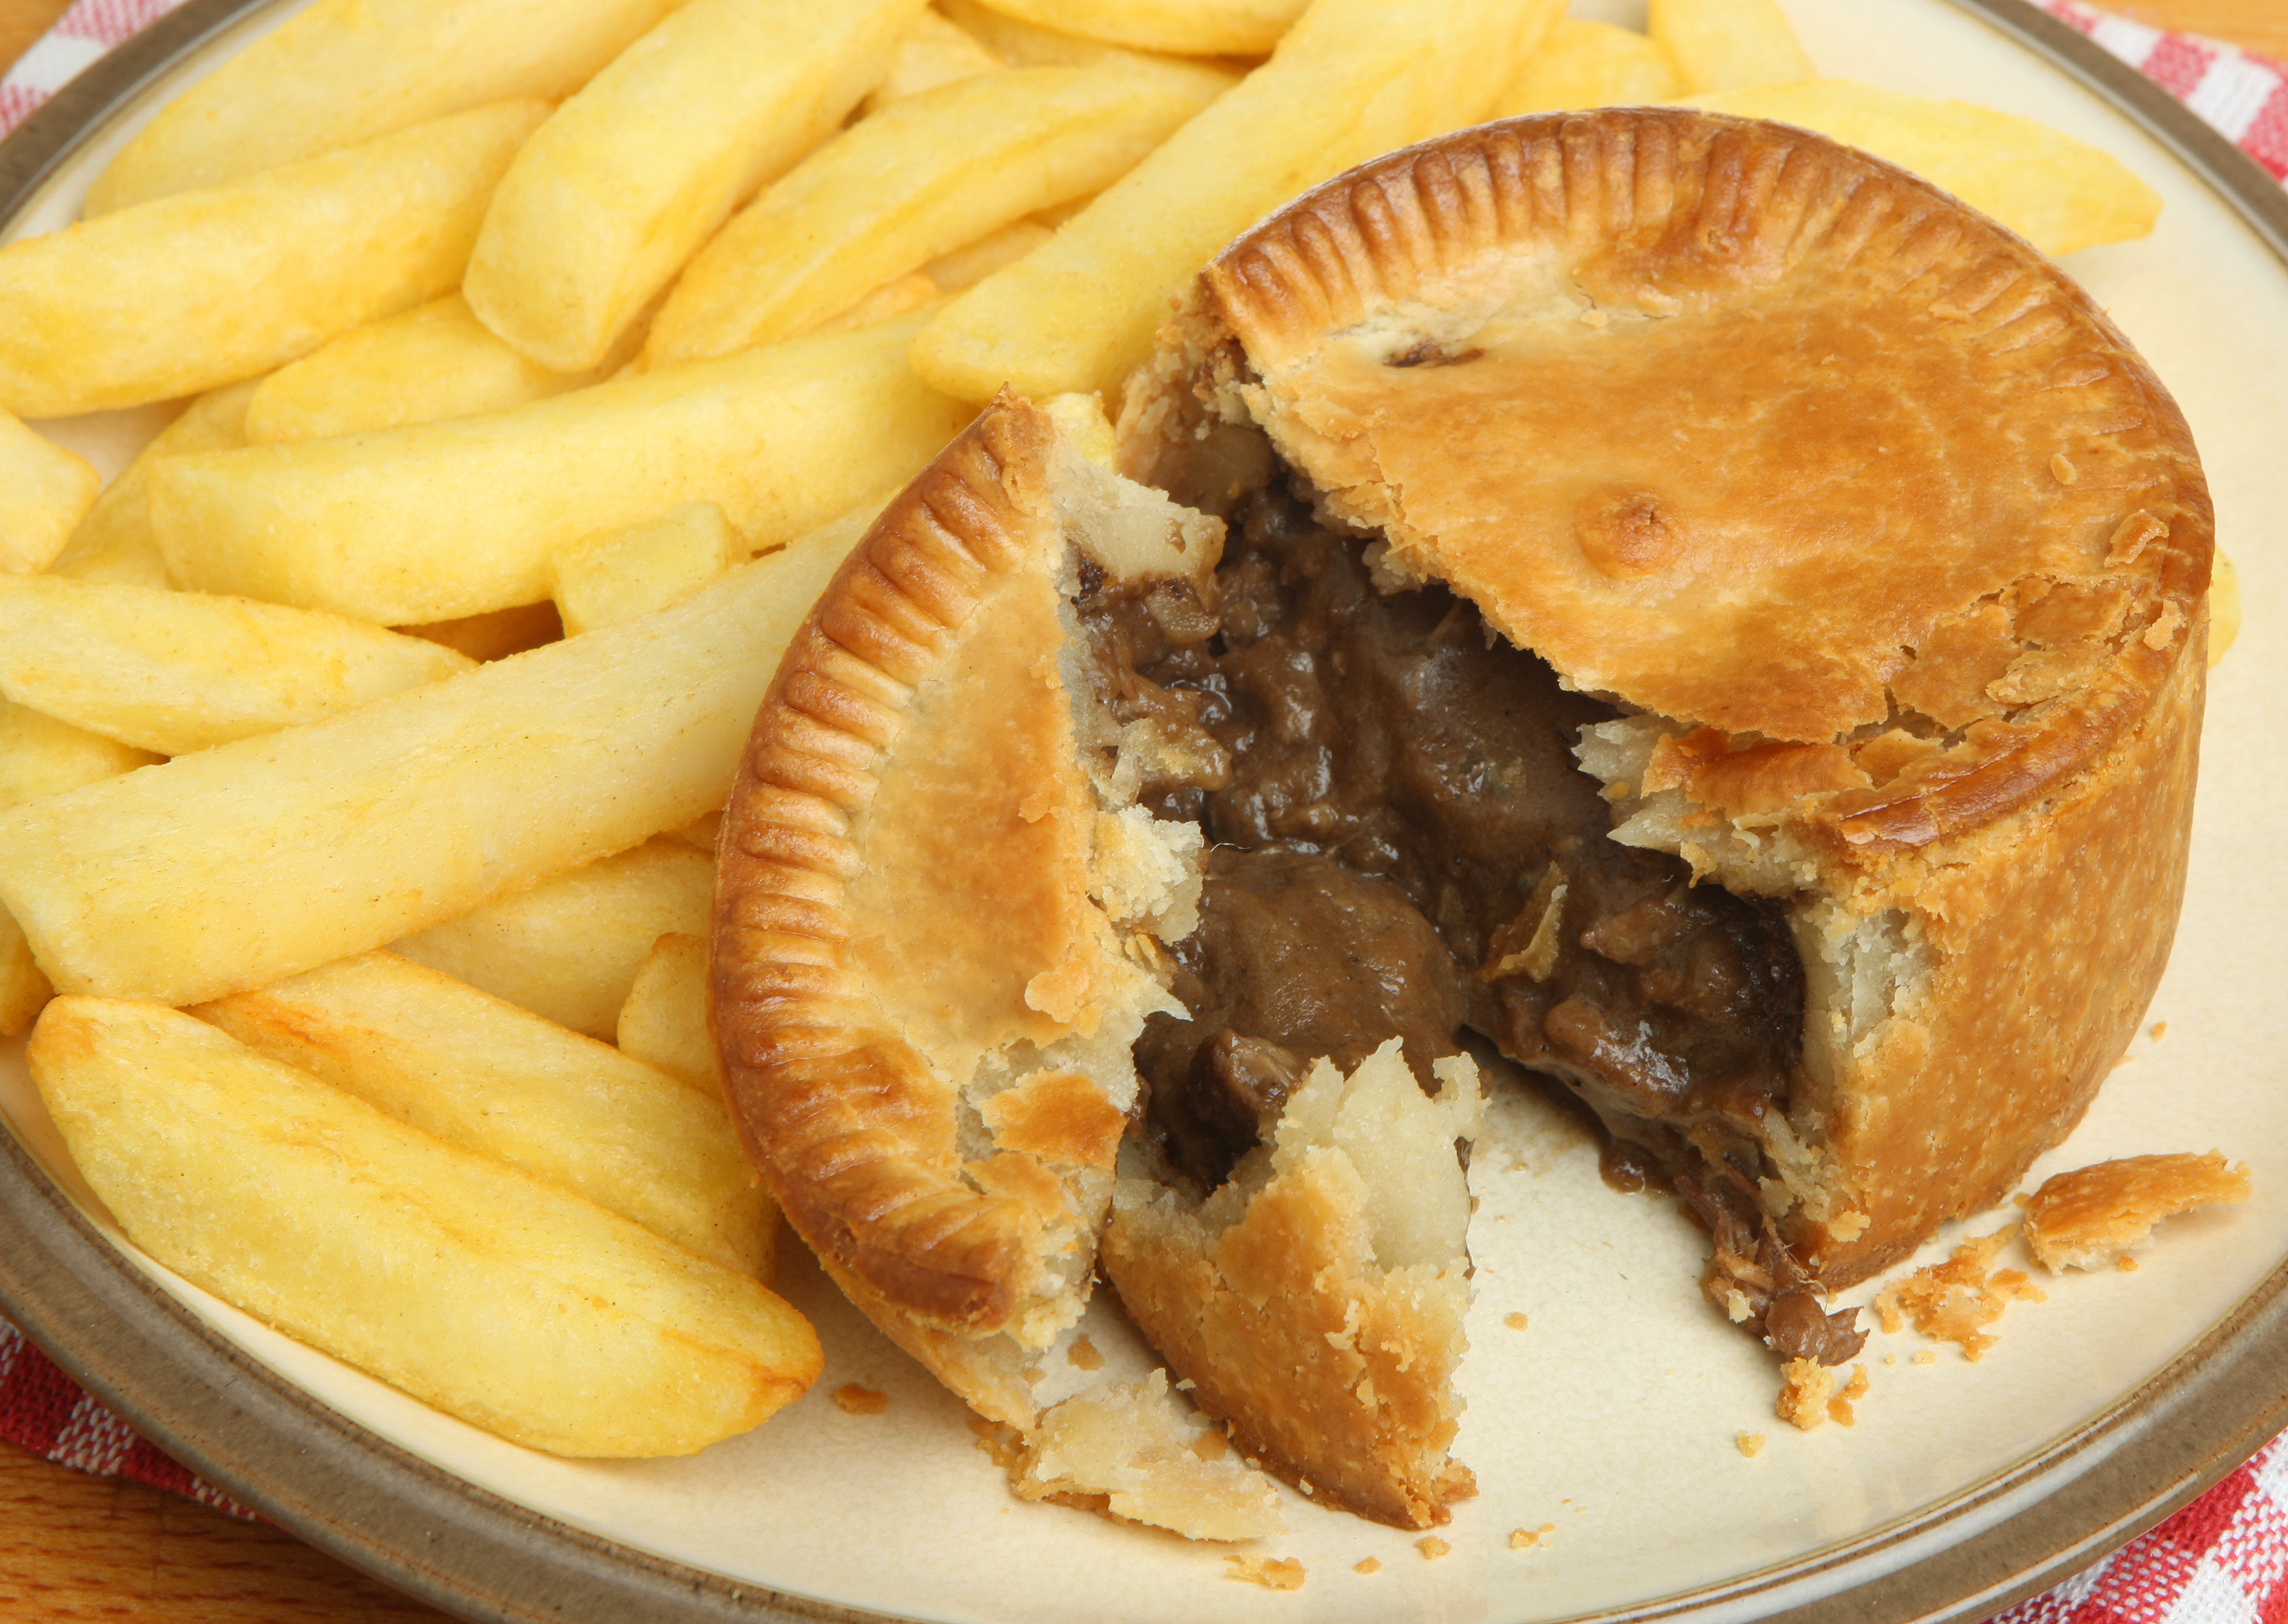 A meat pie with a bite taken out, on a plate with French fries